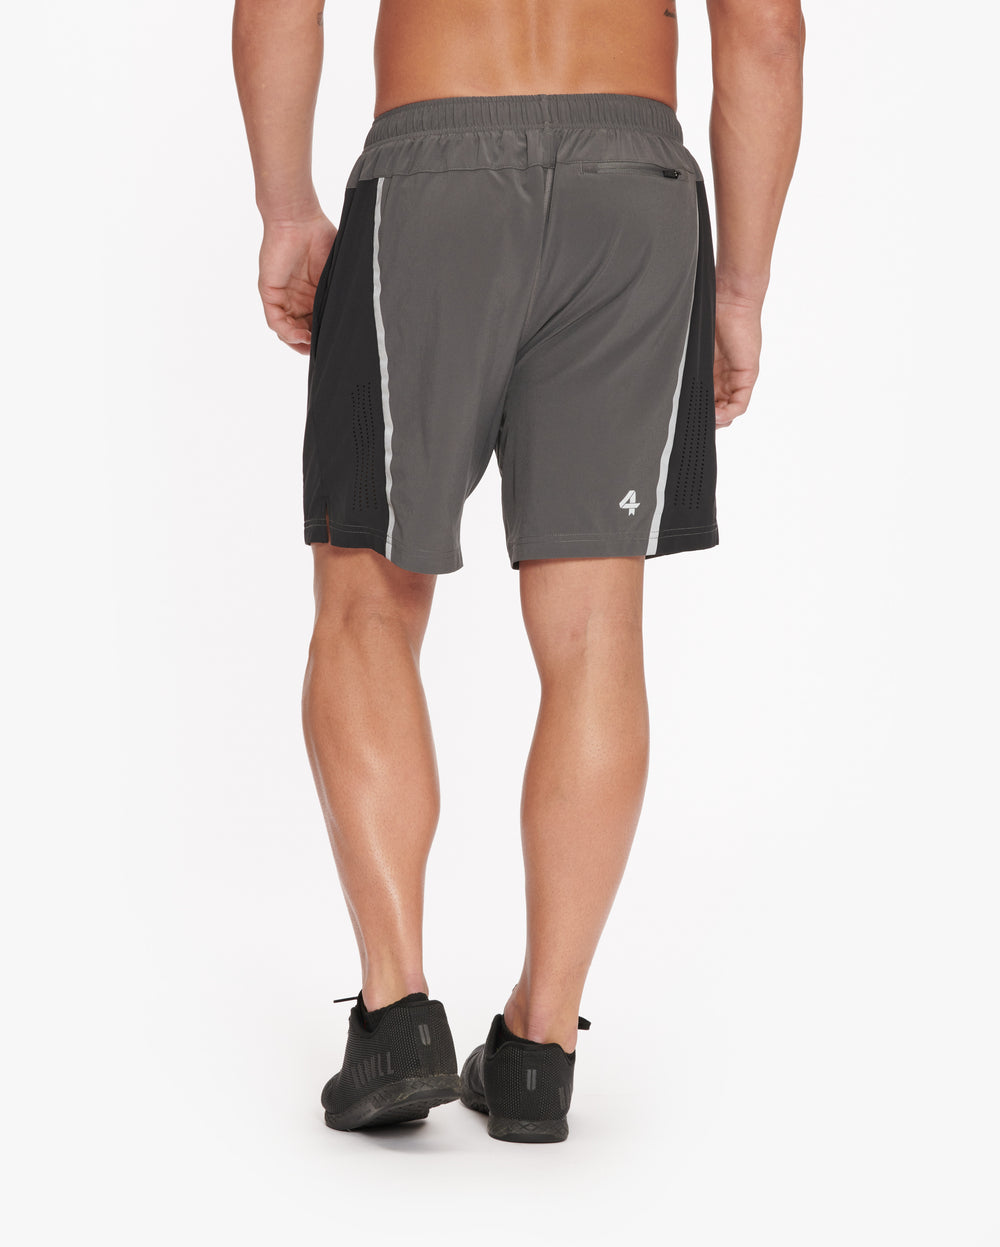 FOURLAPS BOLT SHORT 7" - LINED - CHARCOAL